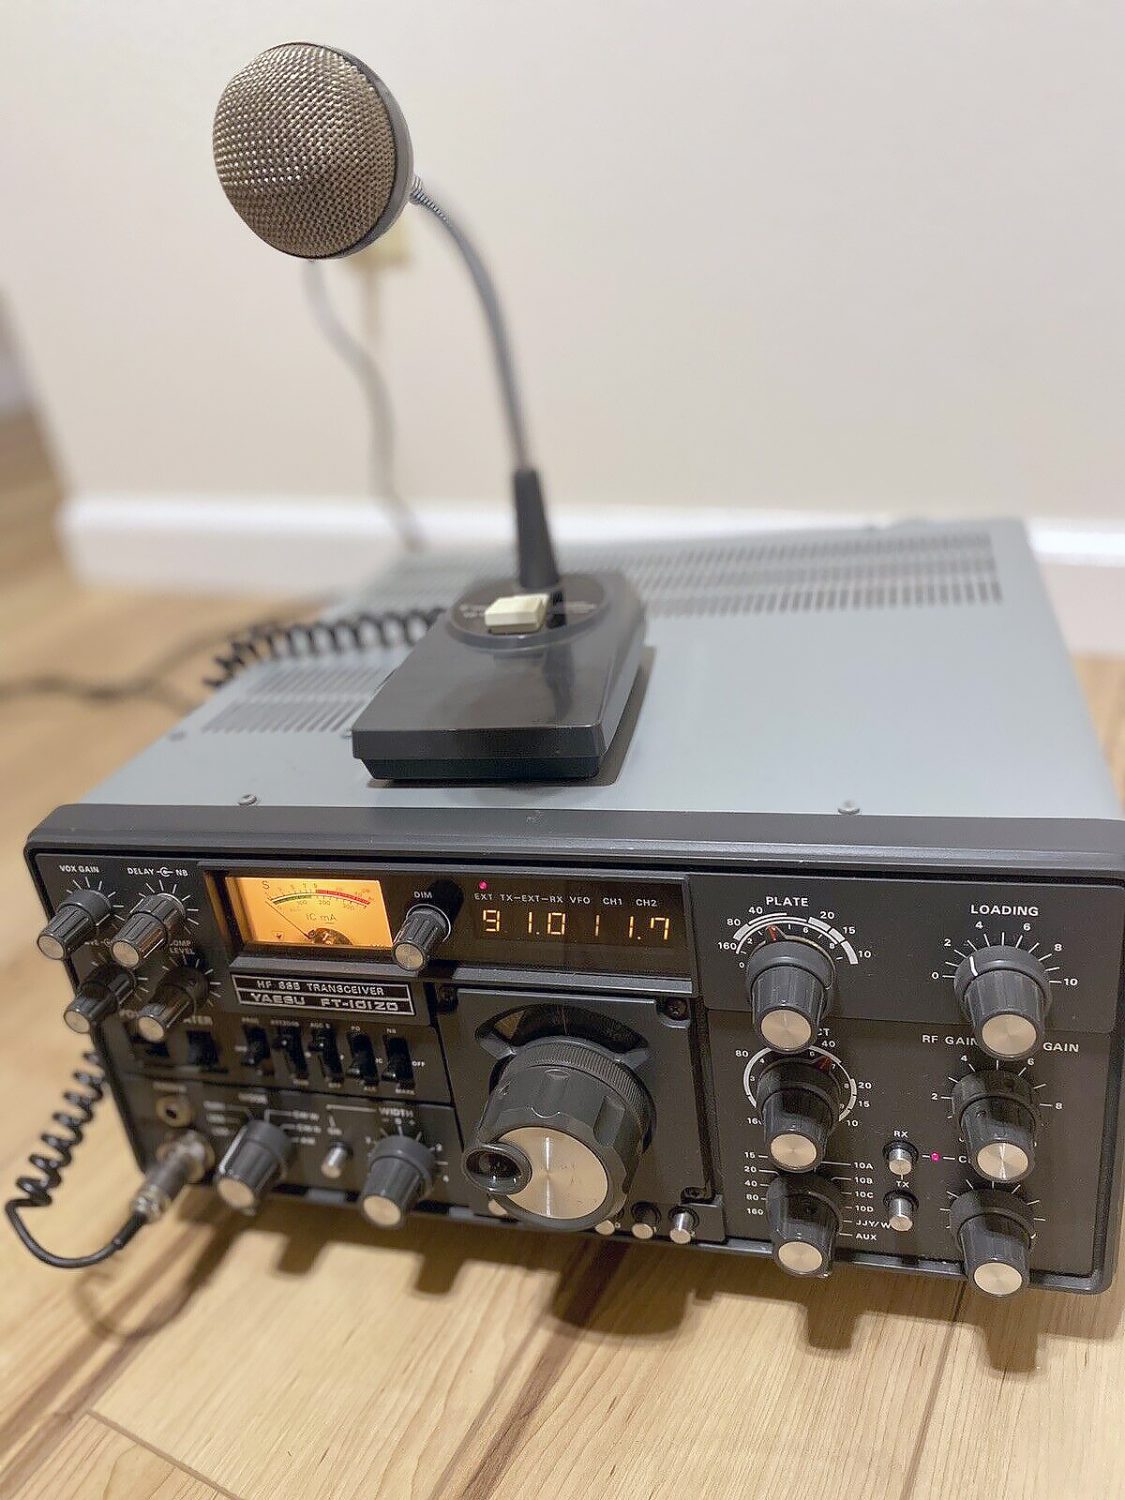 Front Panel of the Yaesu FT-101ZD